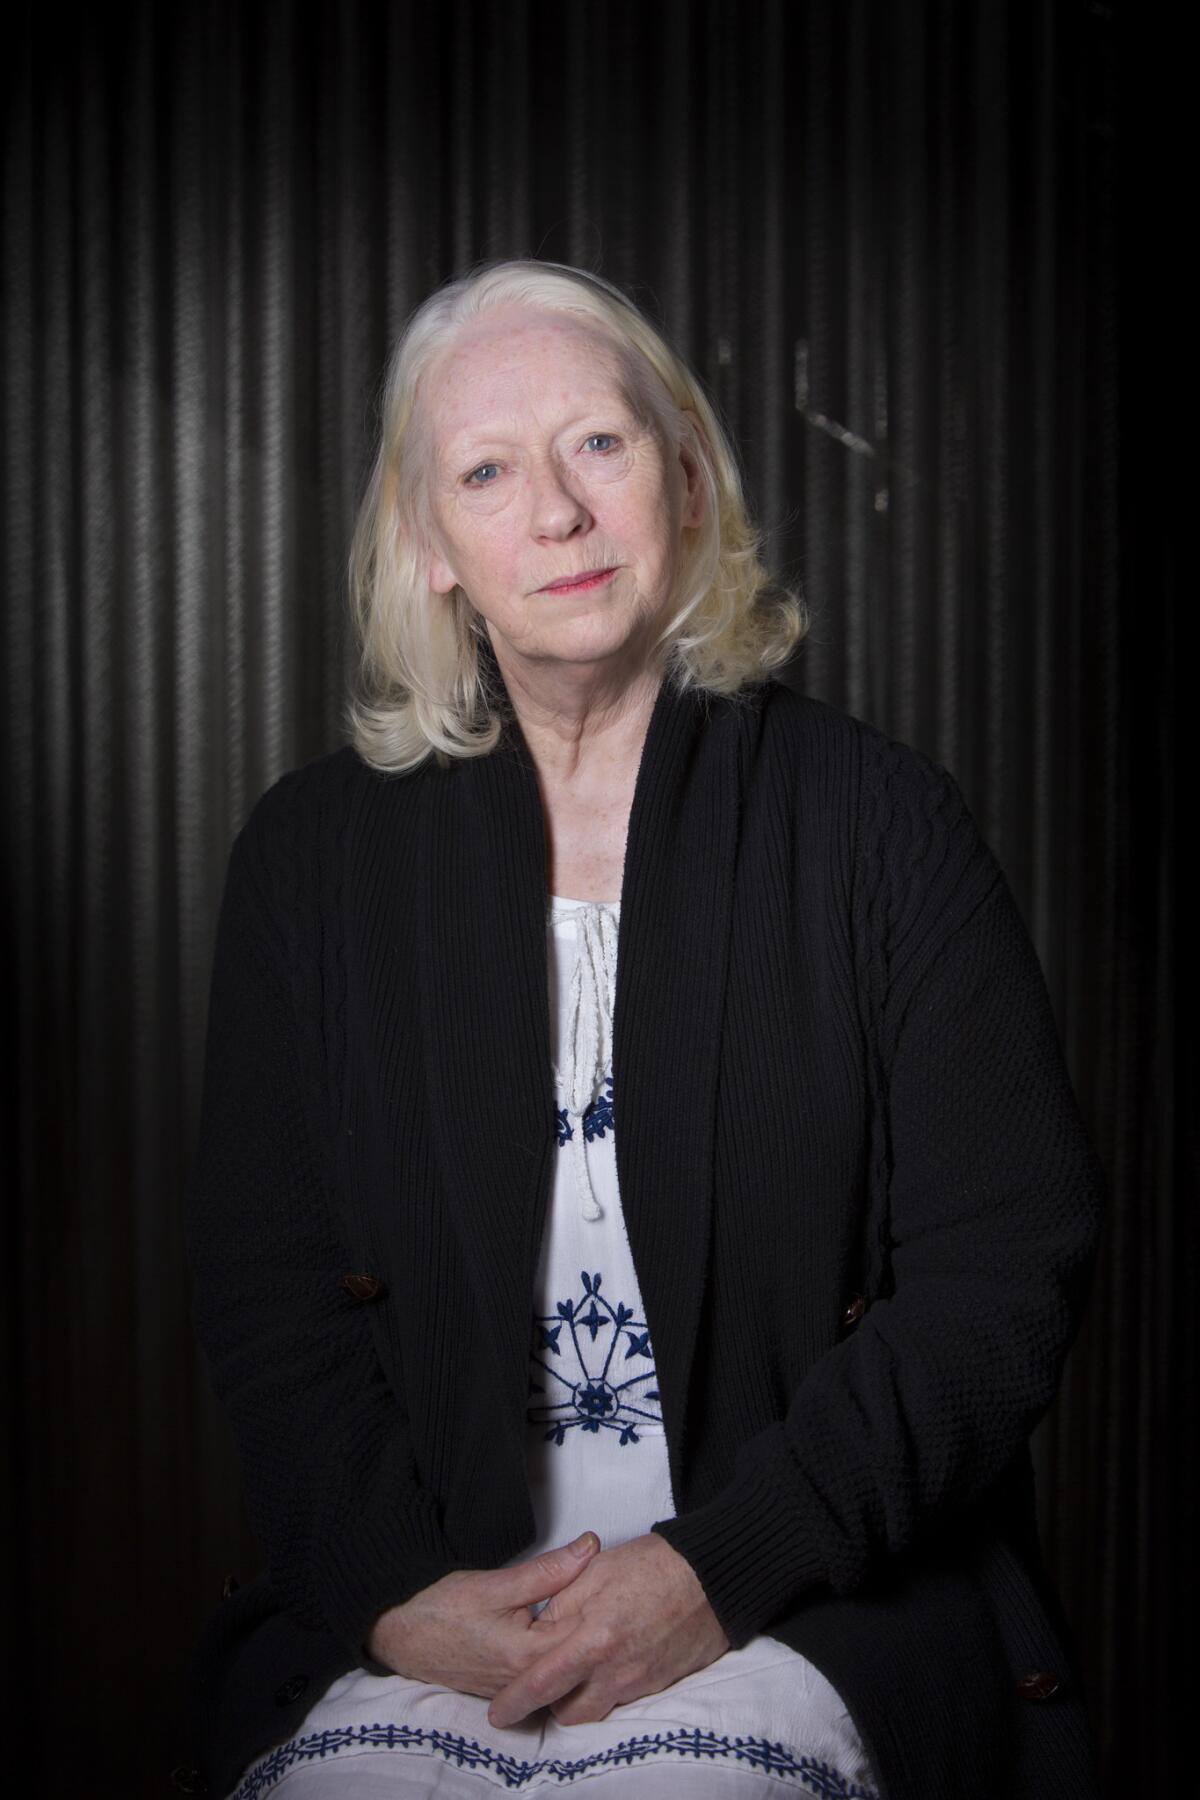 Marie Mullen, photographed at the Mark Taper Forum in Los Angeles. (Liz O. Baylen / Los Angeles Times)